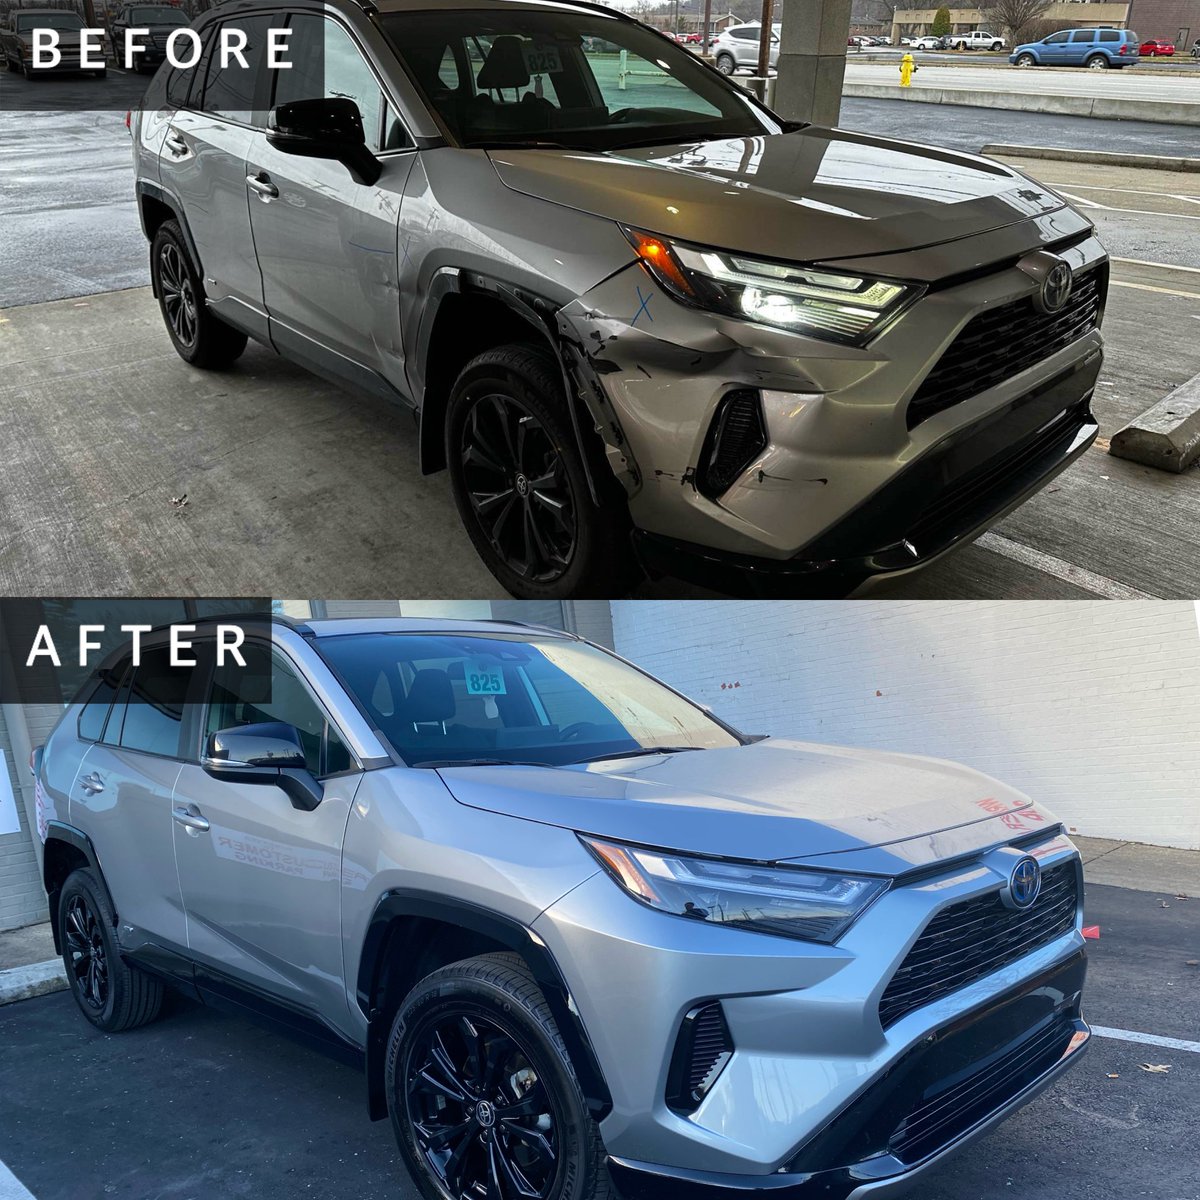 Witness the incredible transformations at Neil Huffman Collision Center! Our team has the skill and dedication to restore even the most damaged cars to their former glory. #HuffmanHasIt #NeilHuffmanCollision #CarRepair #BeforeAndAfter #Louisville